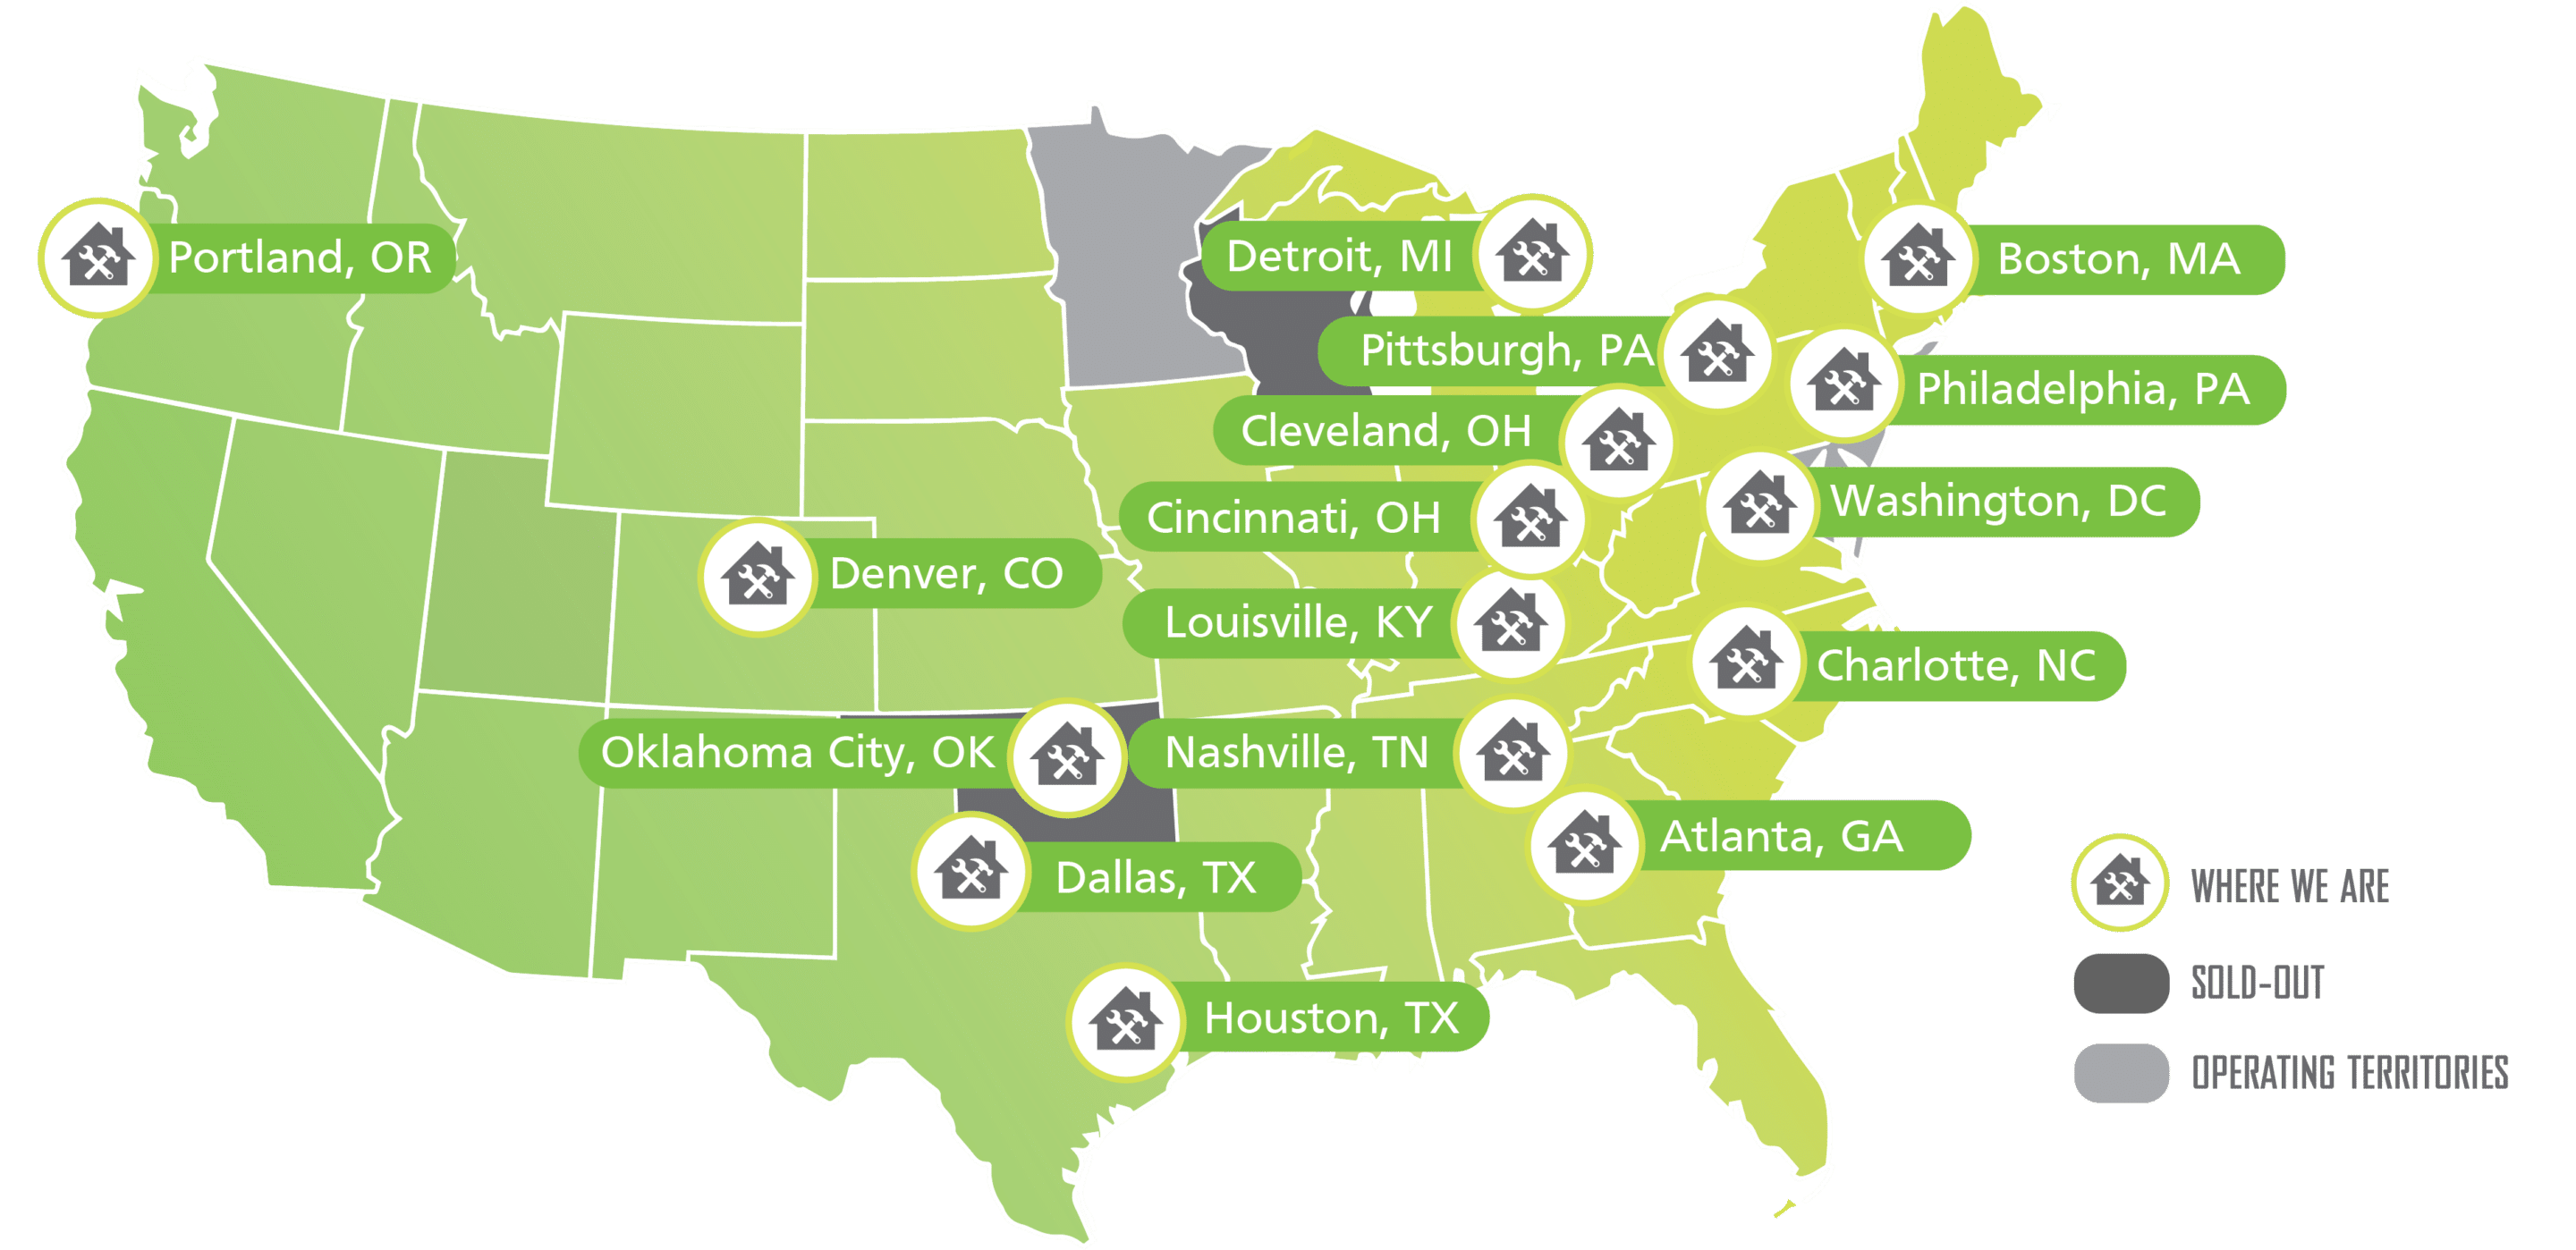 Skedaddle pest control franchise available territories map.